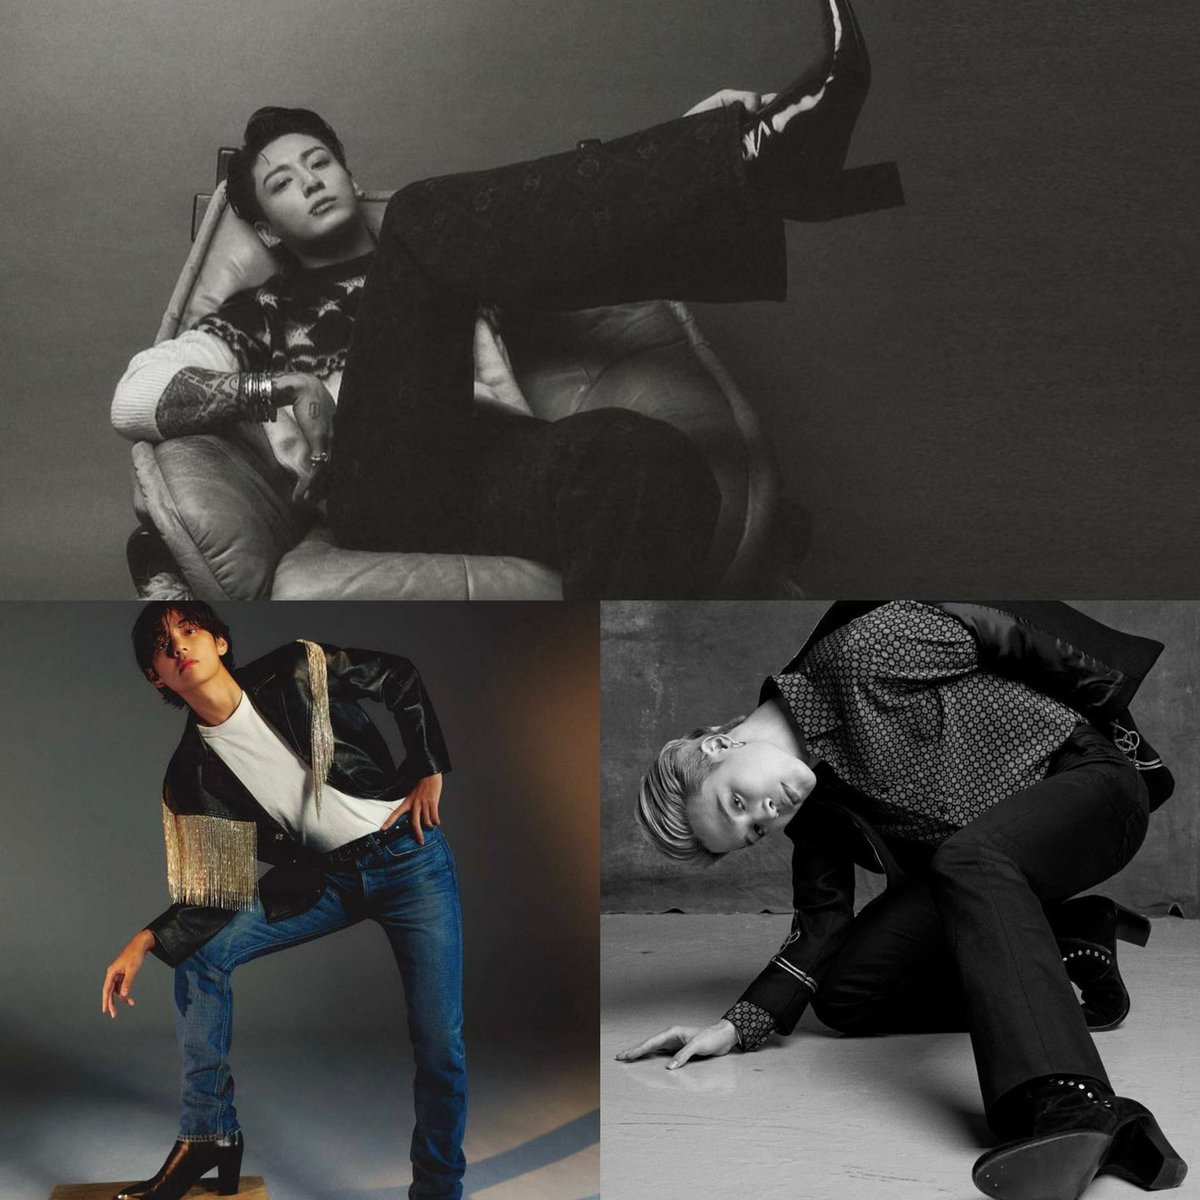 These boots are made for walkin'
And that's just what they'll do
One of these days these boots are gonna walk all over you
#nancysinatra 
#BTS 
#thesebootsaremadeforwalking 
Seeing these pics reminded me of when I was a child listening to my mom's vinyls. Perfect fit 😍💜♾️